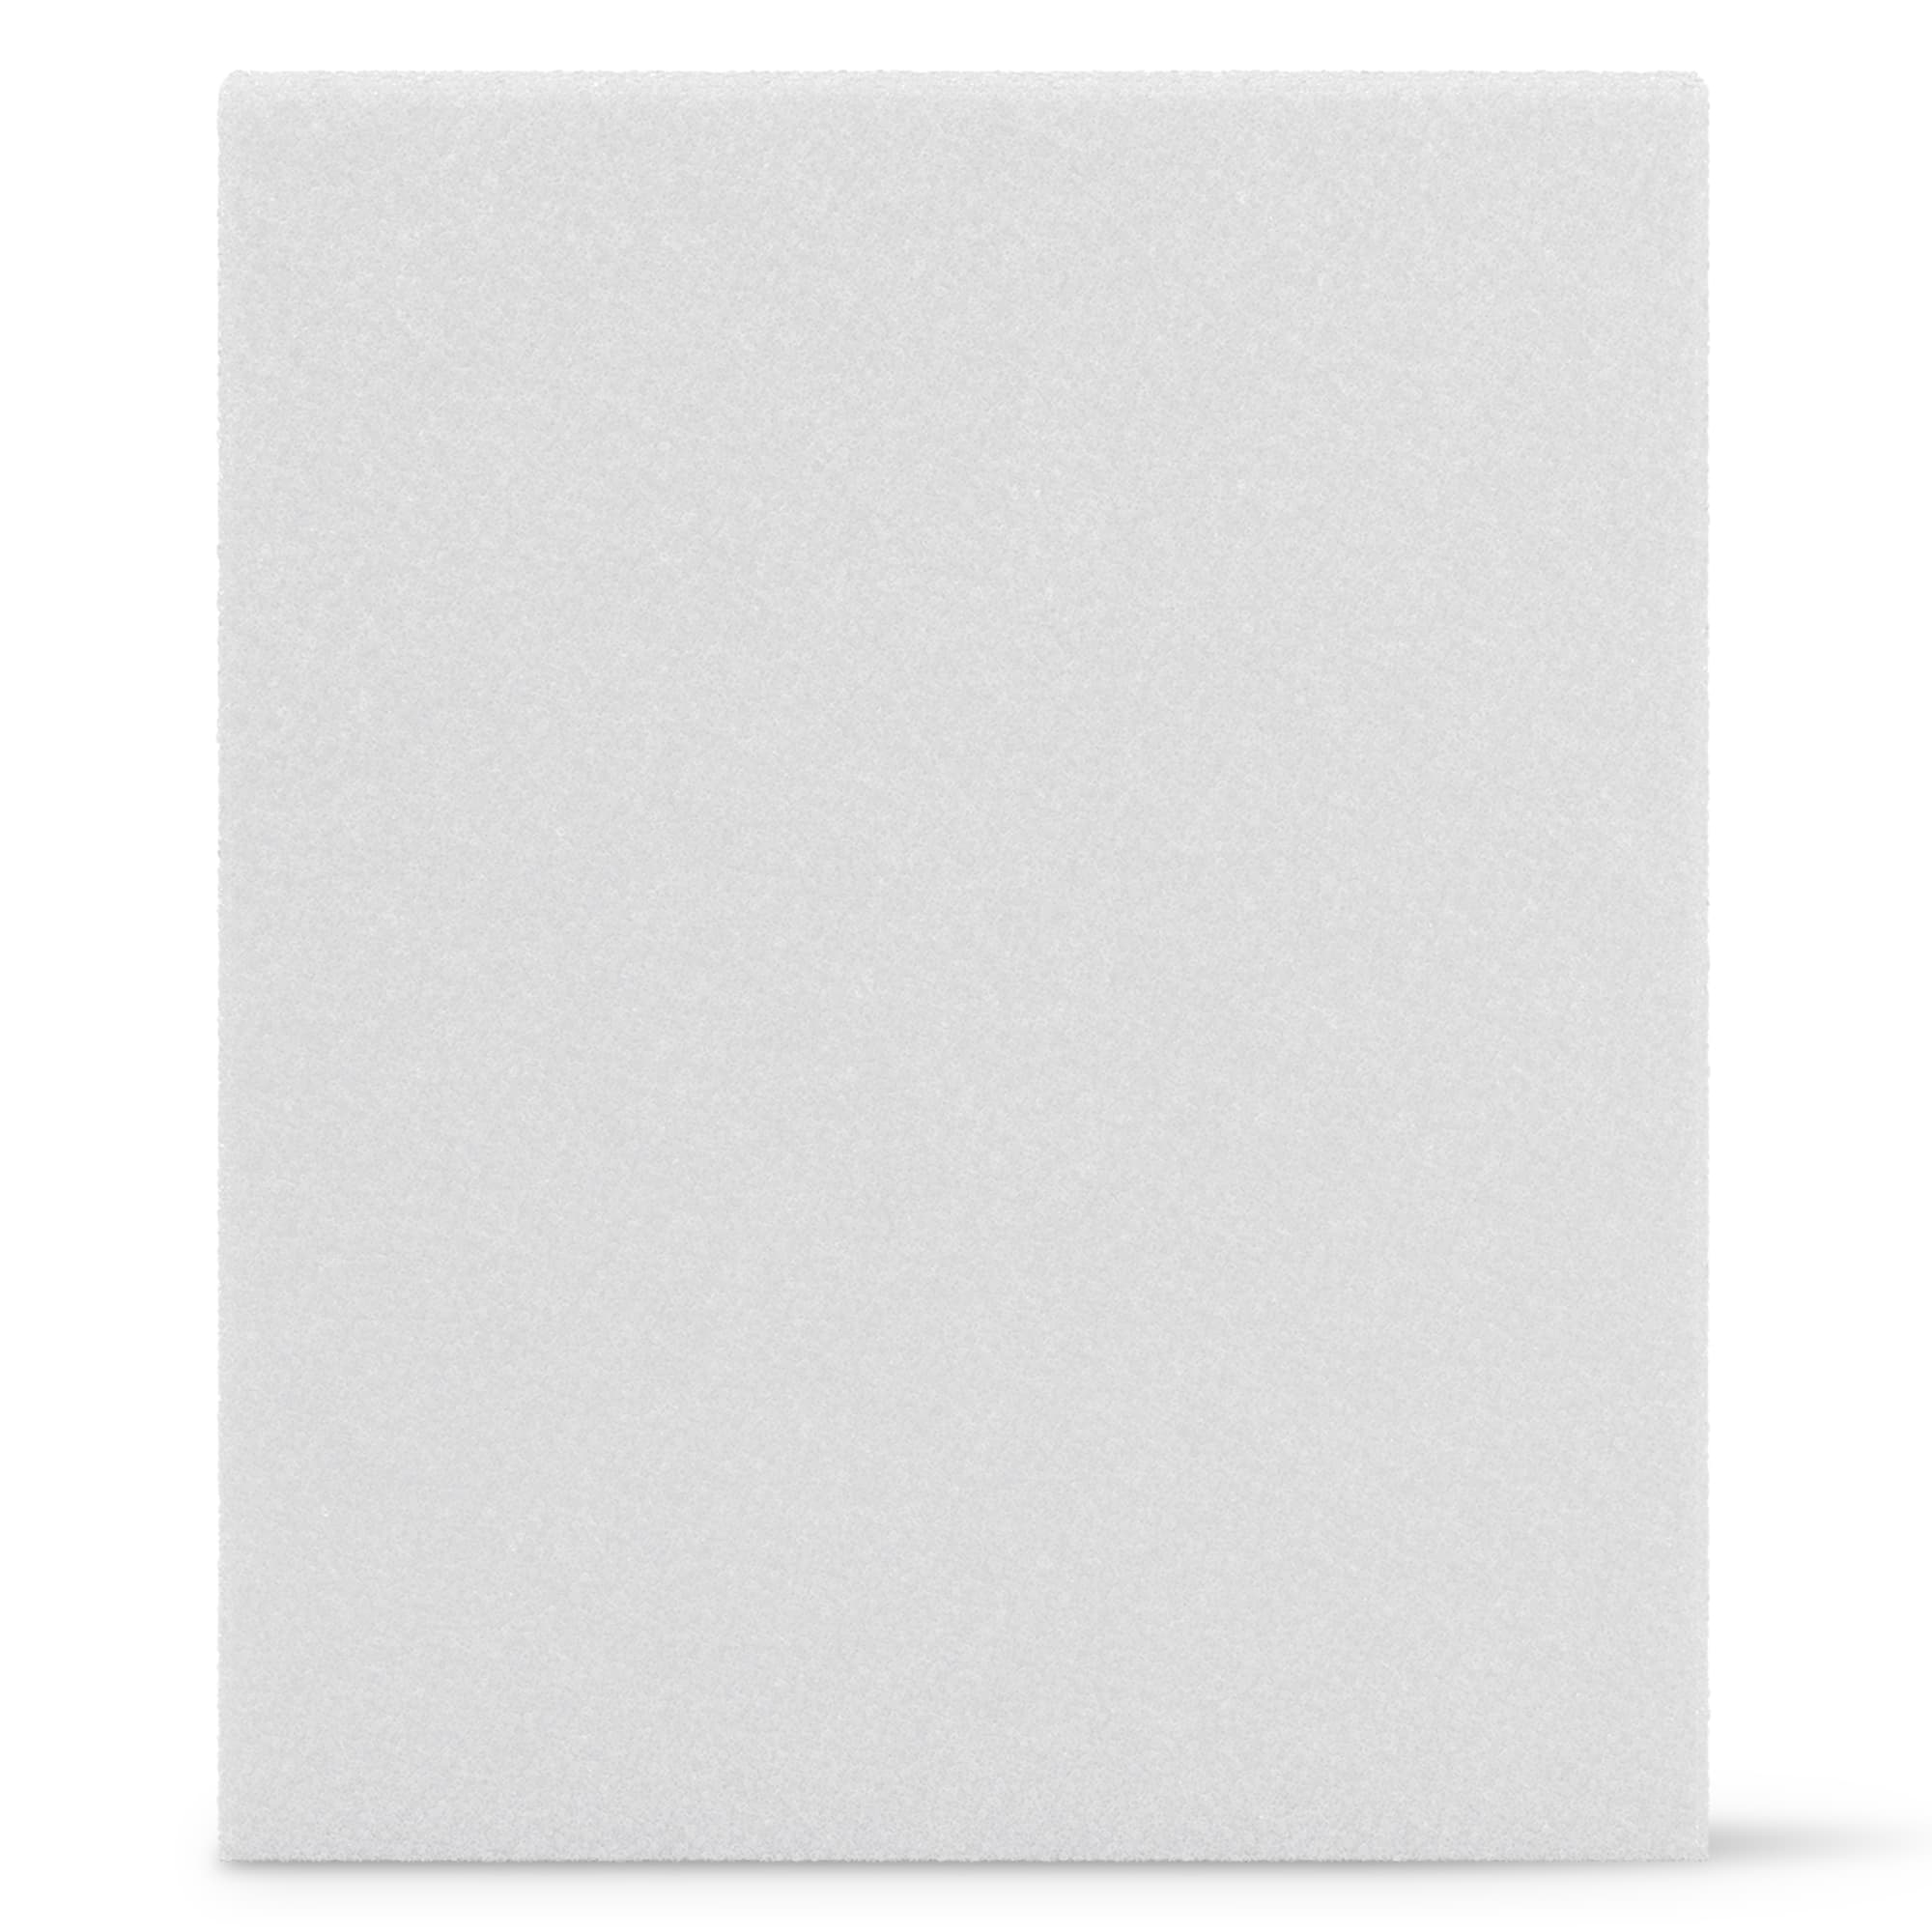 Floracraft Craftfom Ball, 2 Inches, White, Pack Of 12 : Target